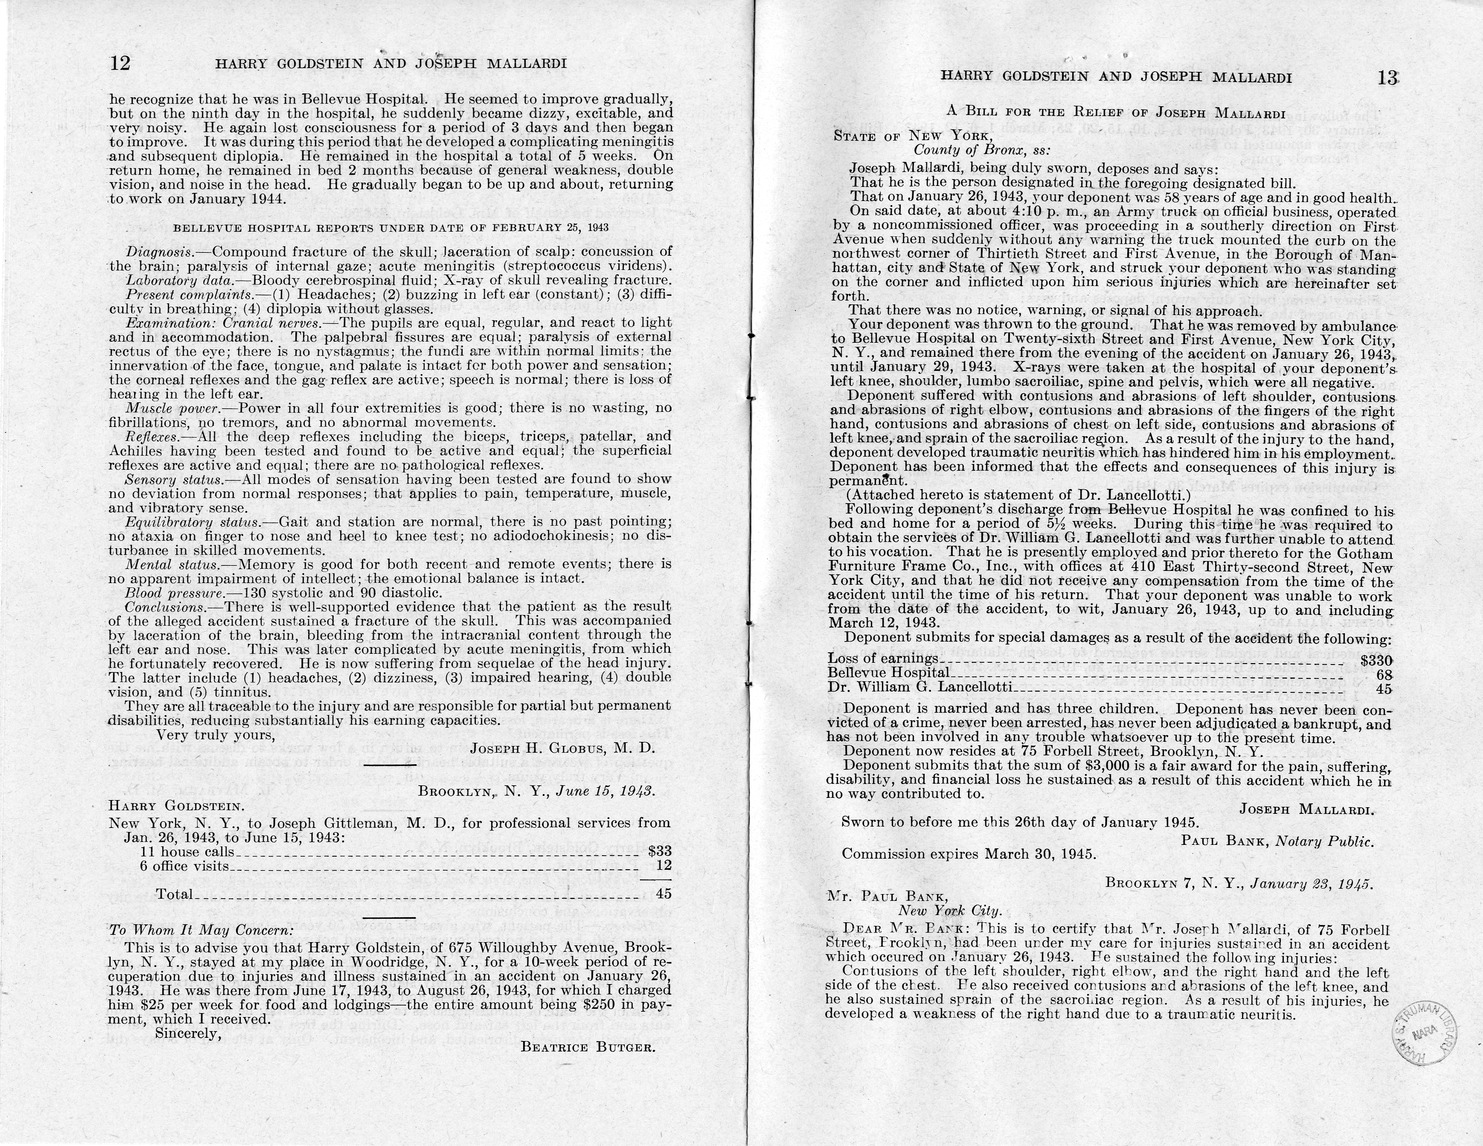 Memorandum from Frederick J. Bailey to M. C. Latta, H.R. 2102, For the Relief of Harry Goldstein and Joseph Mallardi, with Attachments